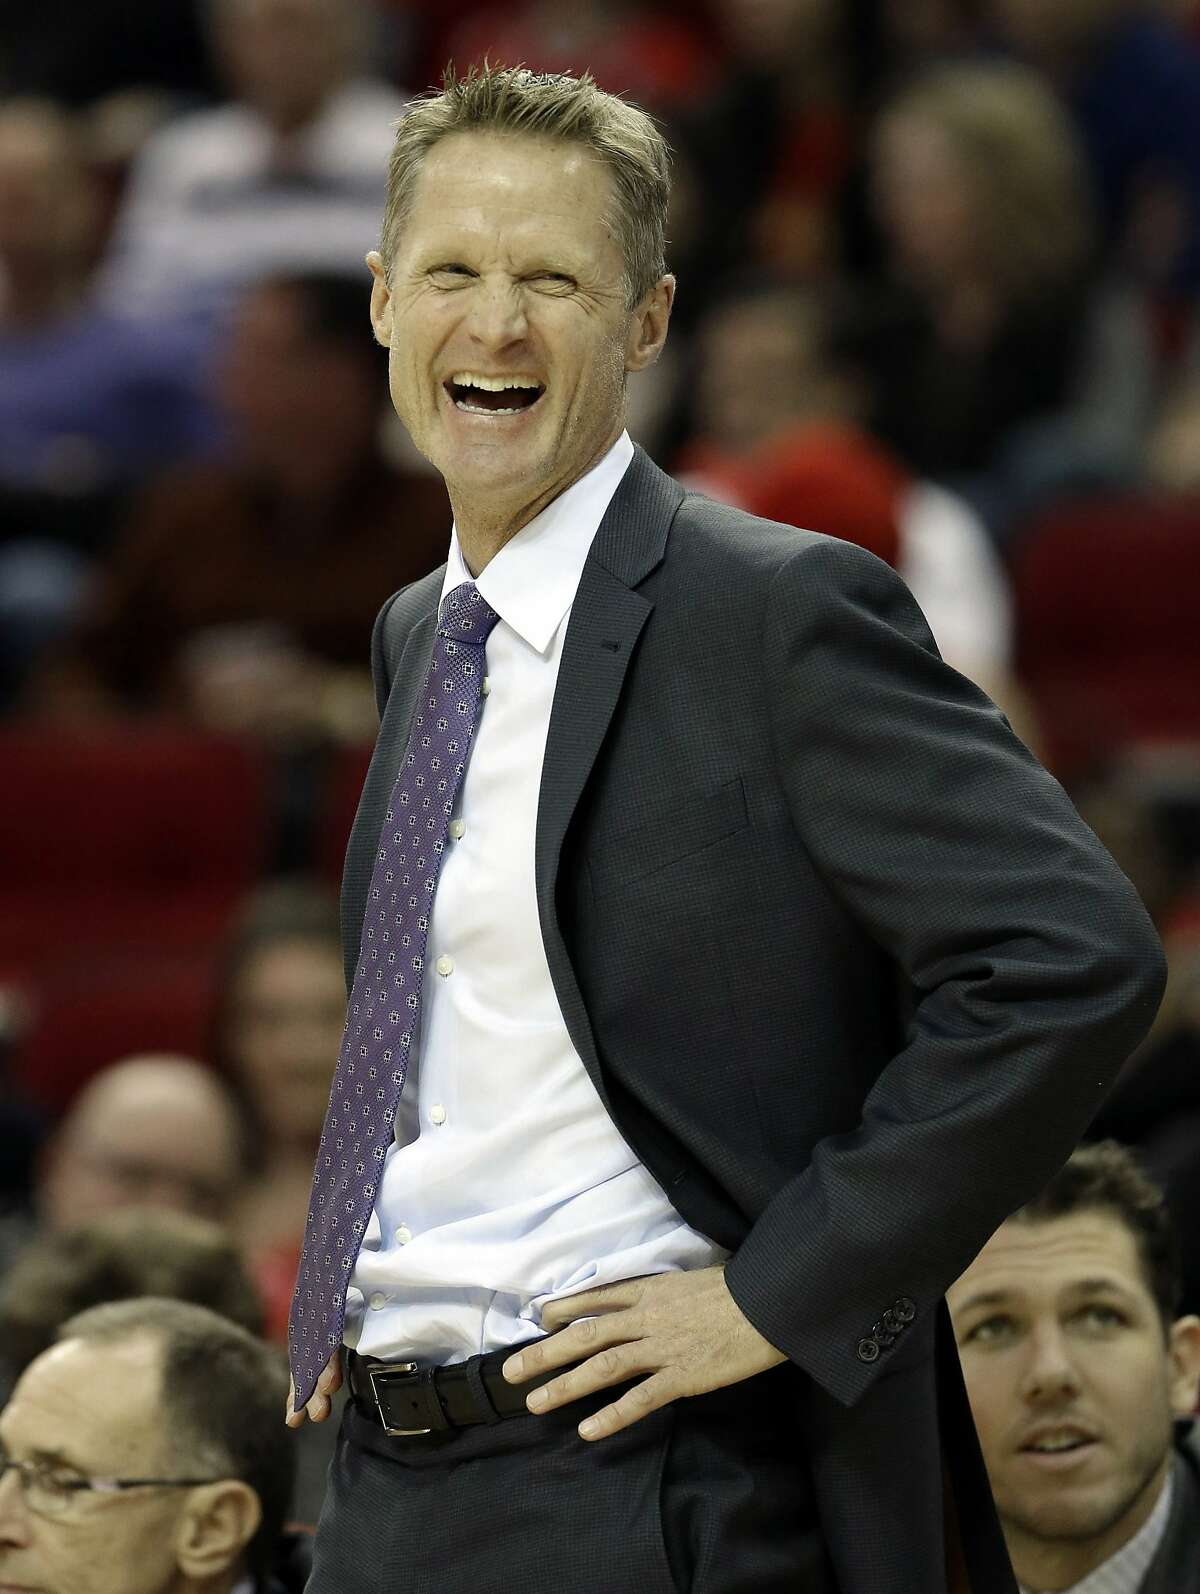 Golden State Warriors coach Steve Kerr laughs at a referee in the first half of an NBA basketball game against the Houston Rockets, Saturday, Jan. 17, 2015, in Houston. (AP Photo/Pat Sullivan)